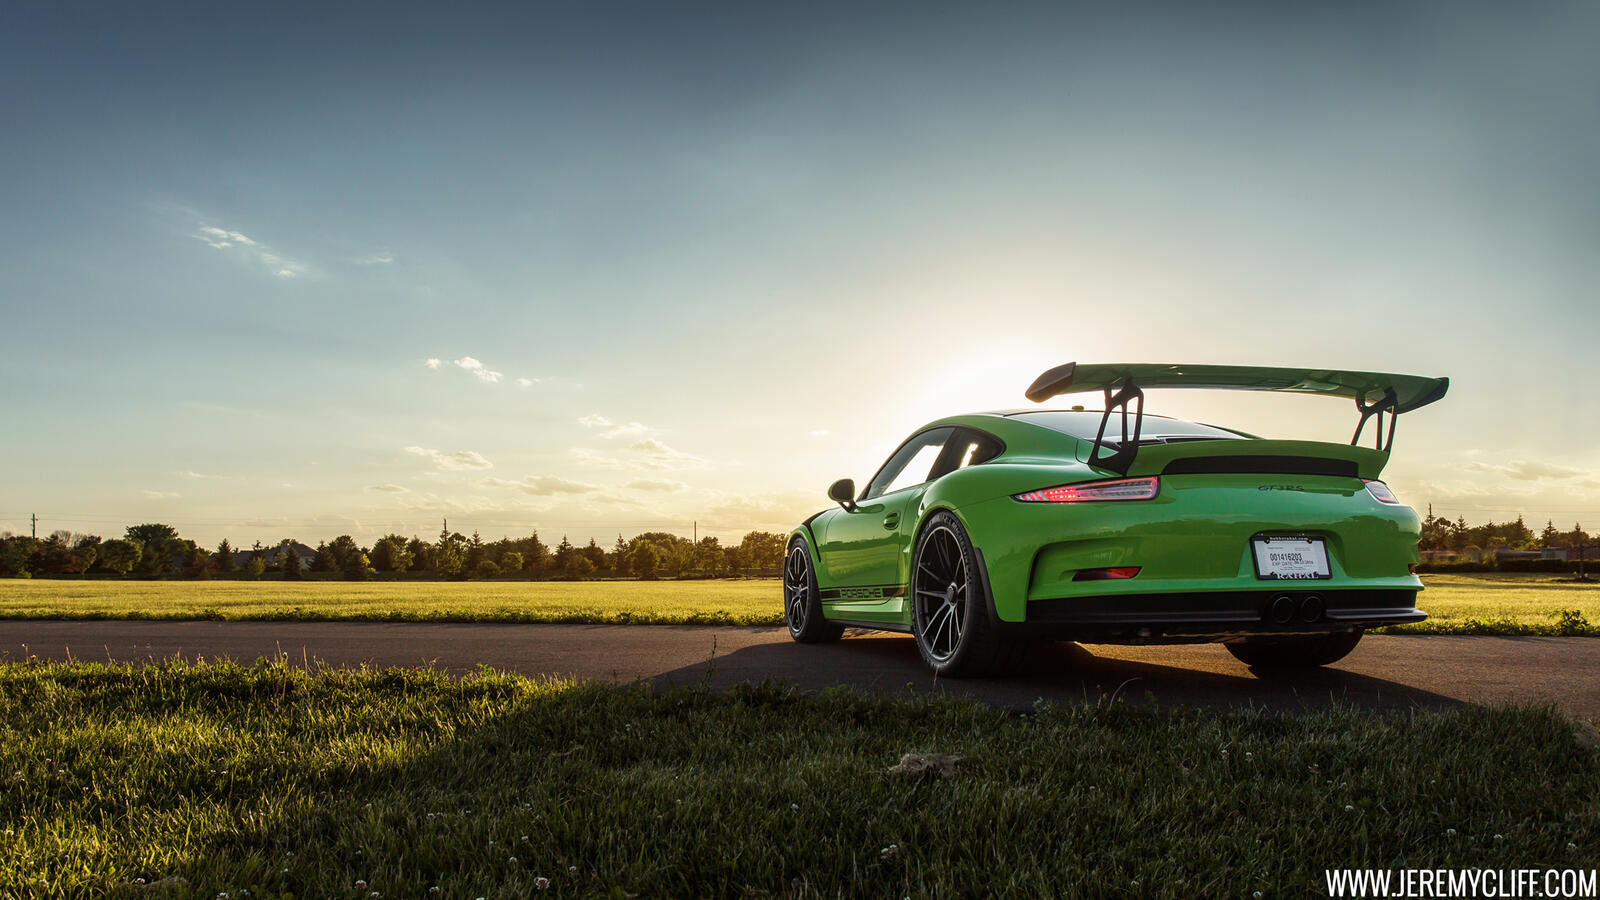 Free photo Porsche 911 in green with a big spoiler